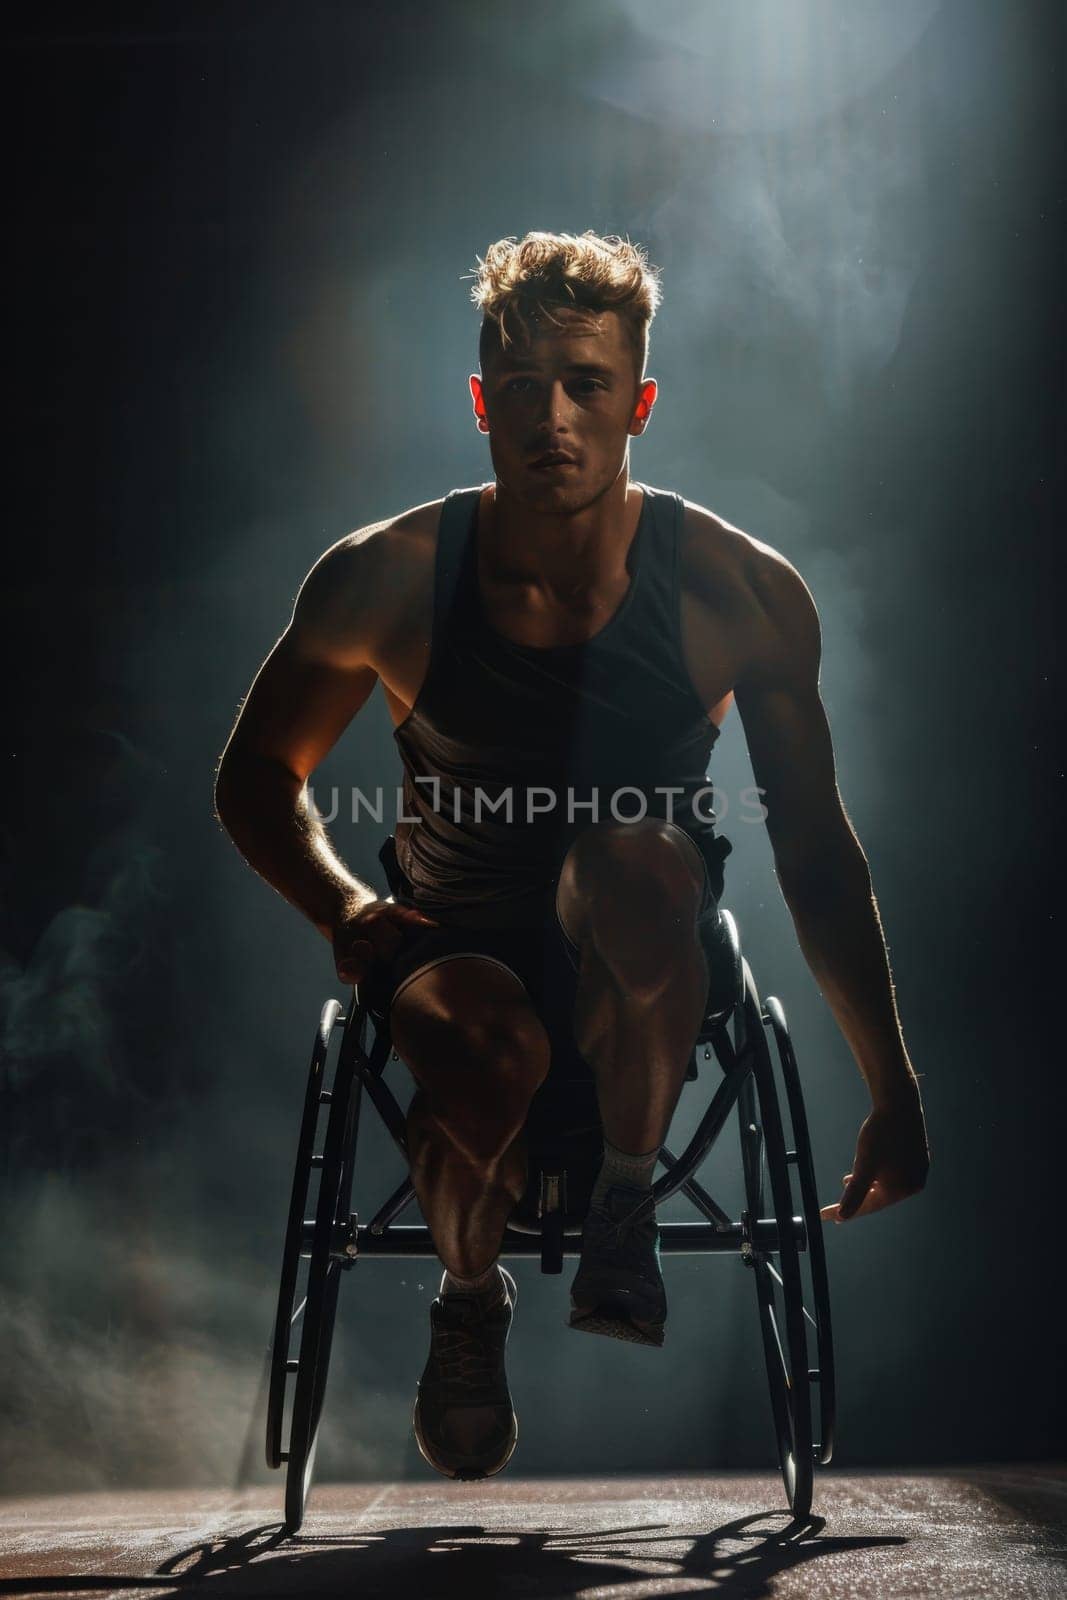 A basketball player sitting on wheelchair.